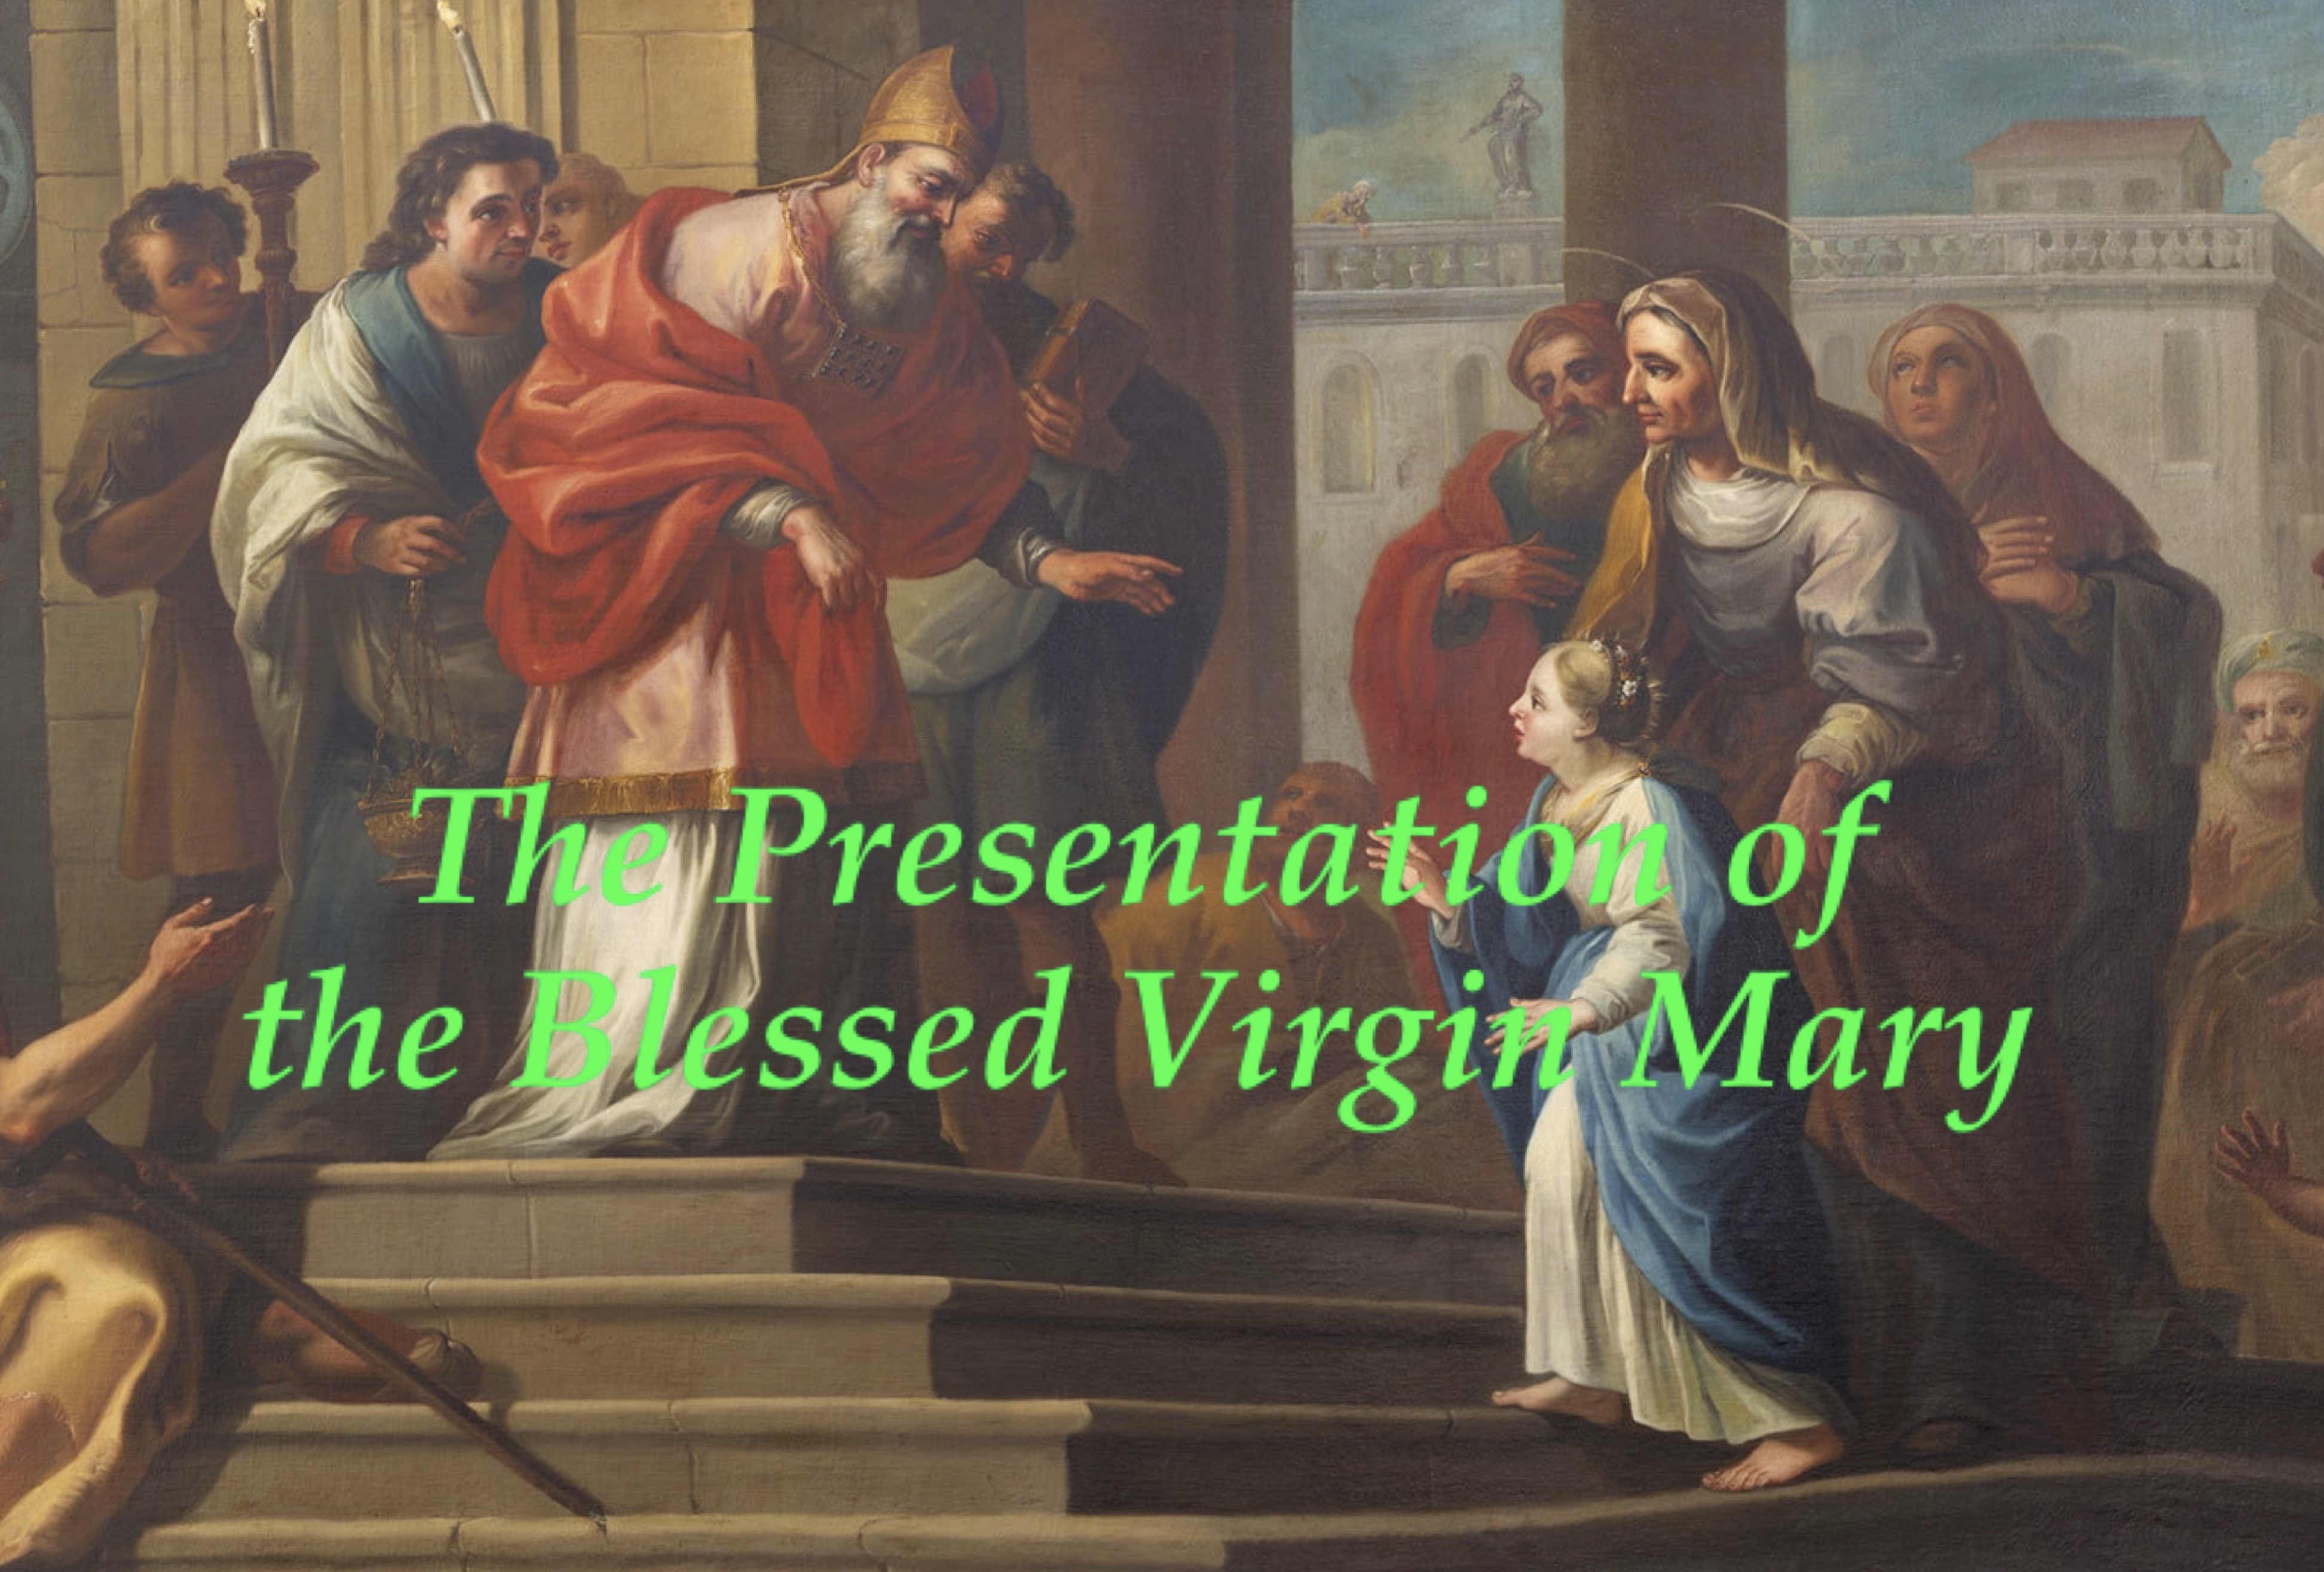 21st November - The Presentation of the Blessed Virgin Mary 